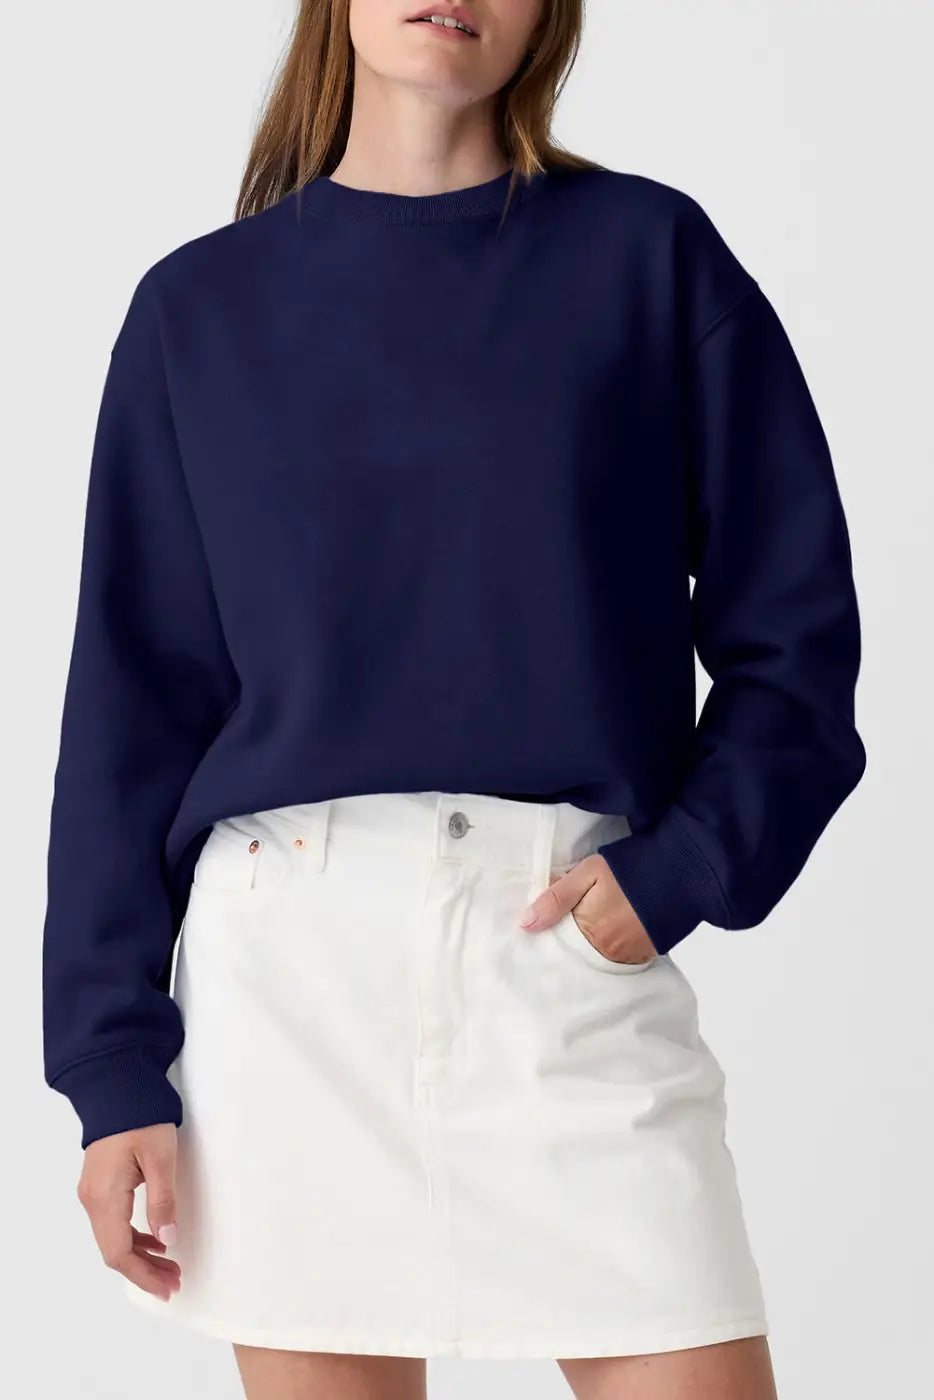 Relaxed fit terry sweatshirt - navy blue / s / 50% polyester + 50% cotton - sweatshirts